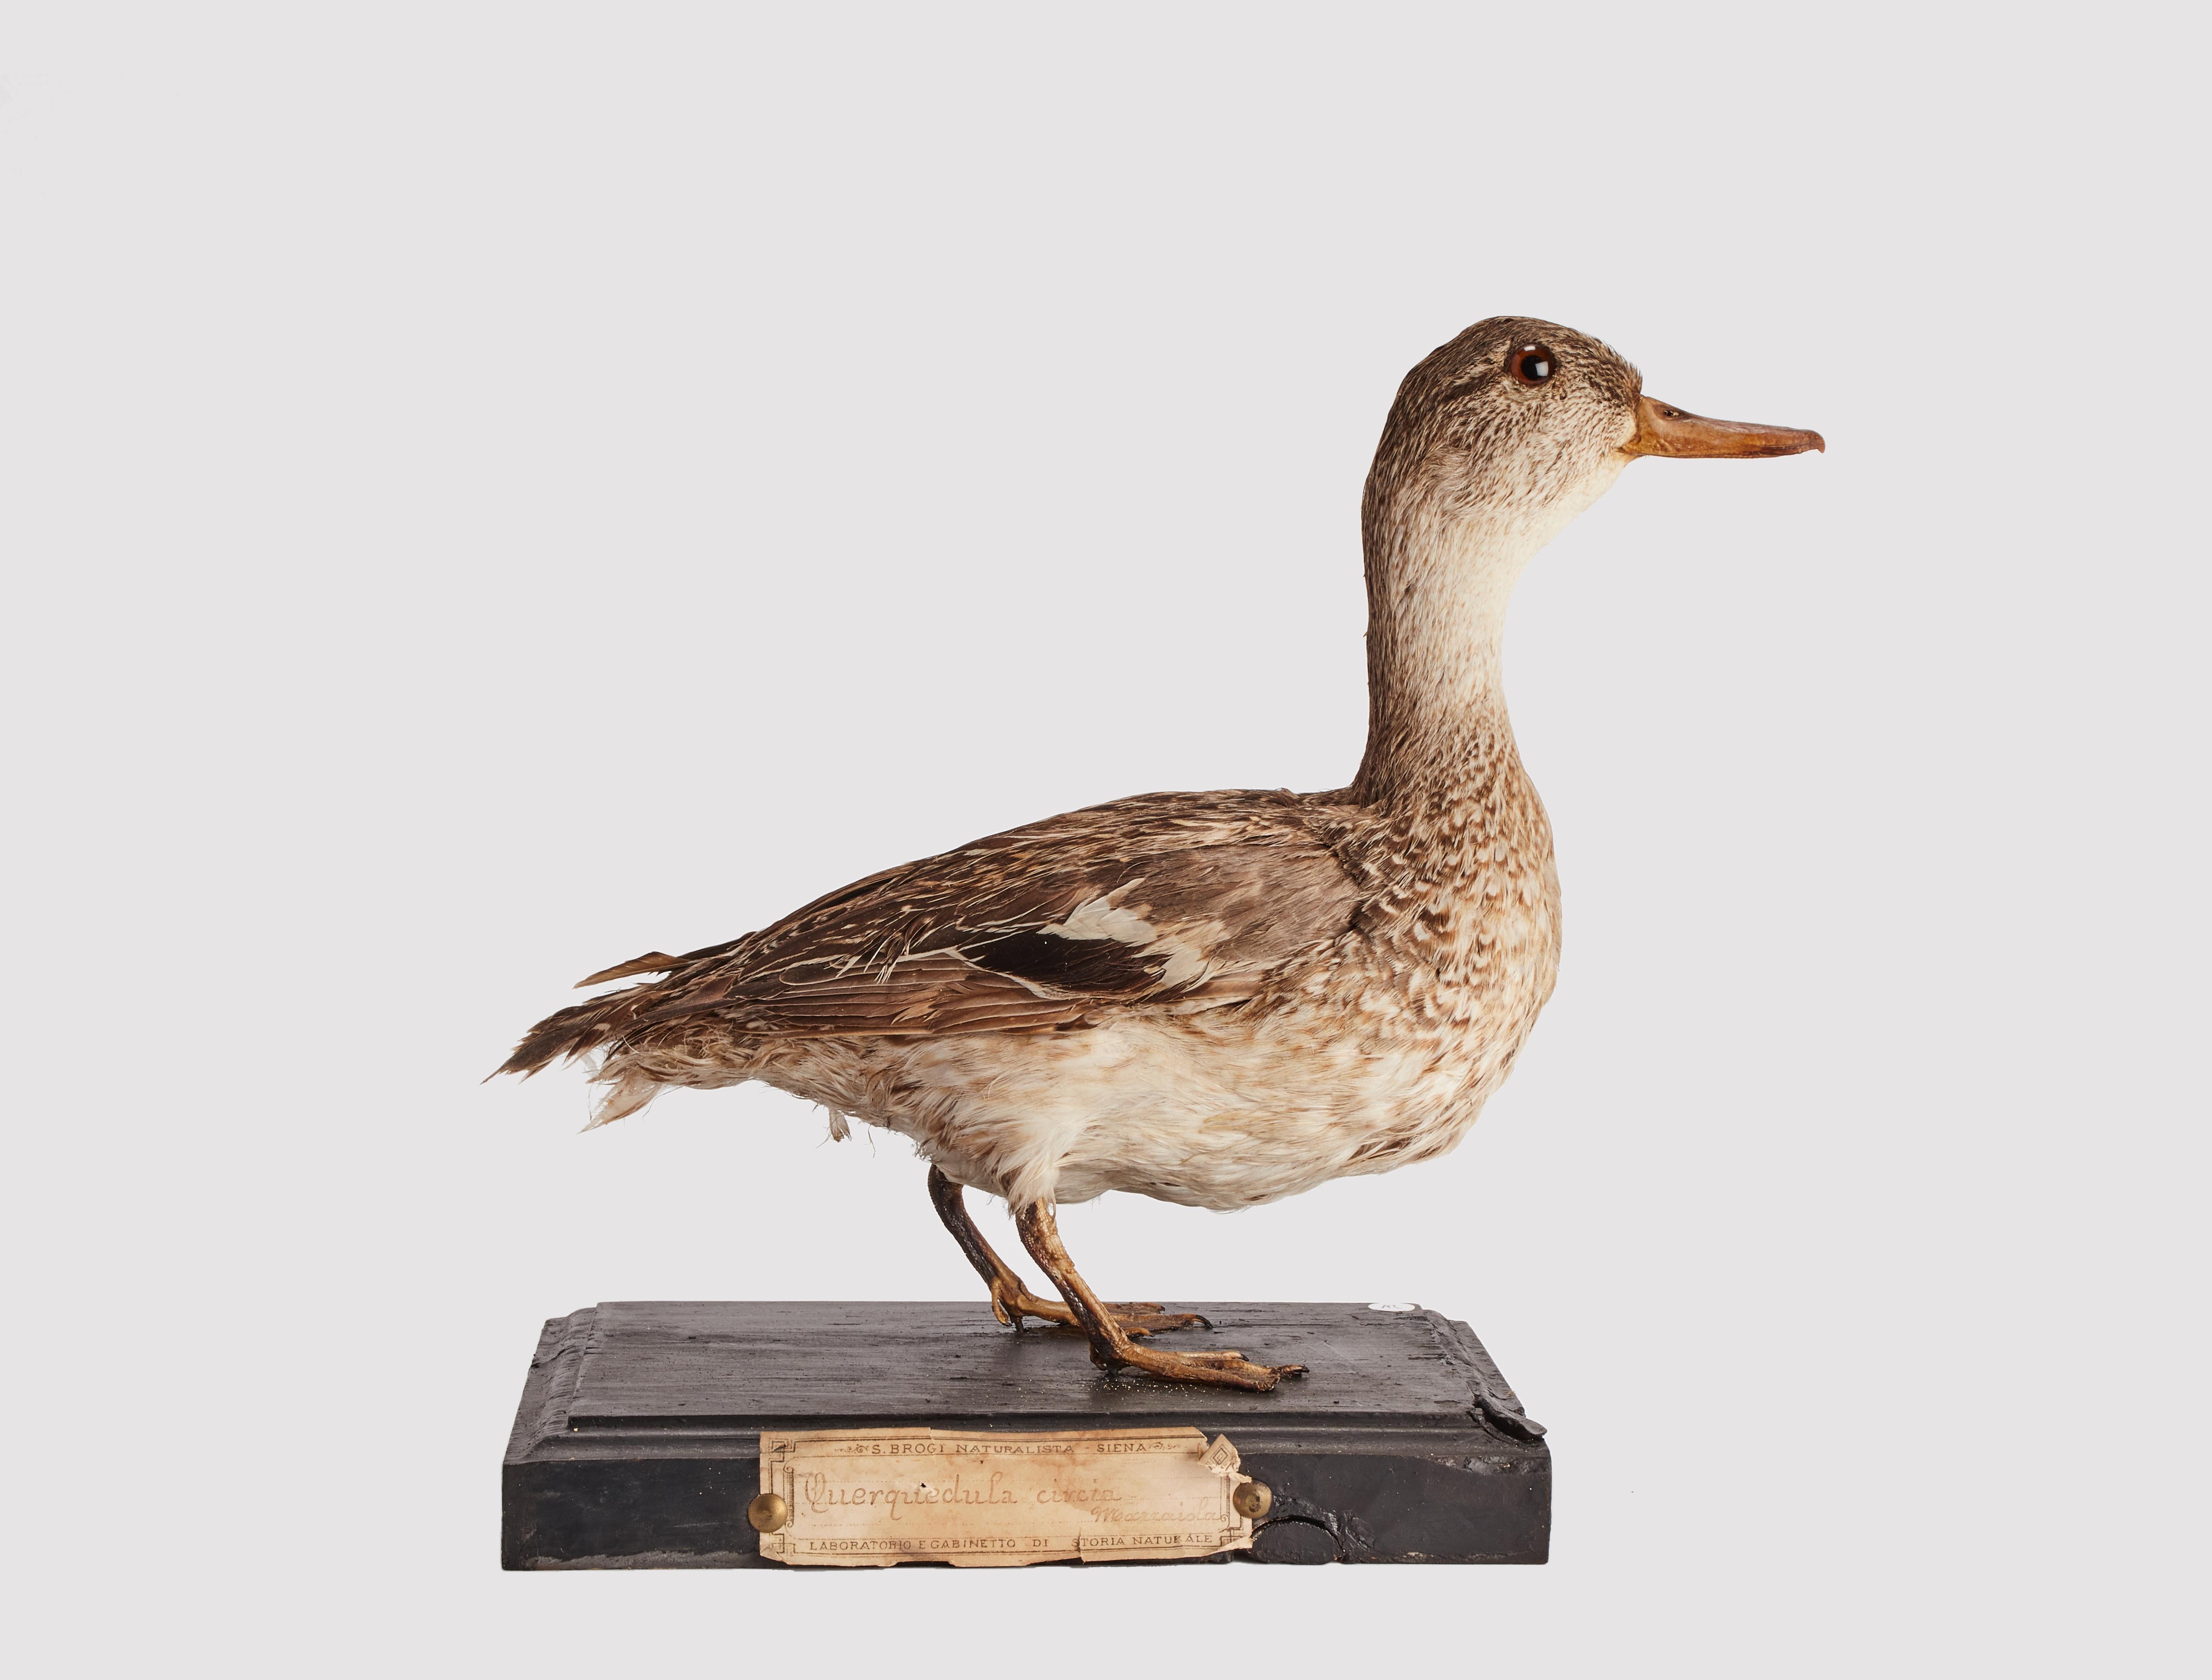 Natural specimen from Wunderkammer Stuffed bird (Anas querquedula)  Garganey  mounted on a wooden base with cartouche Specimen for laboratory and Natural history cabinet. S. Brogi Naturalista. Siena, Italy 1880 ca.